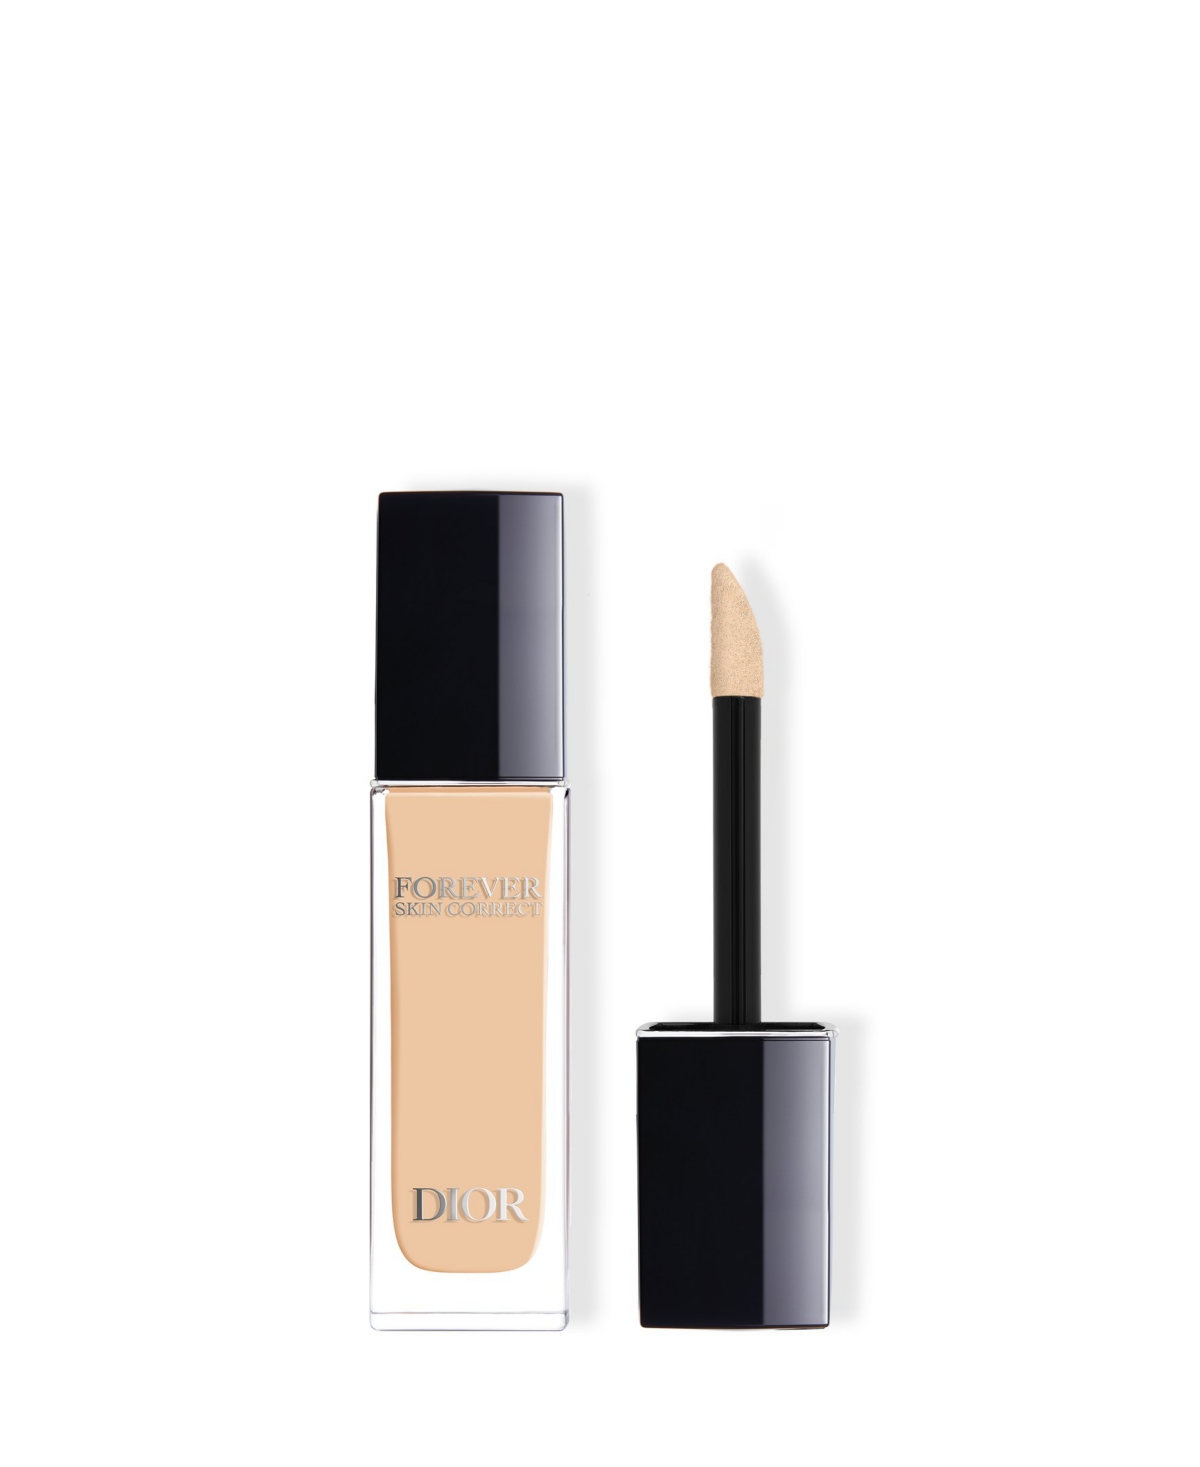 Dior Forever Skin Correct Full-coverage Concealer In W Warm (very Light Skin With Golden Unde